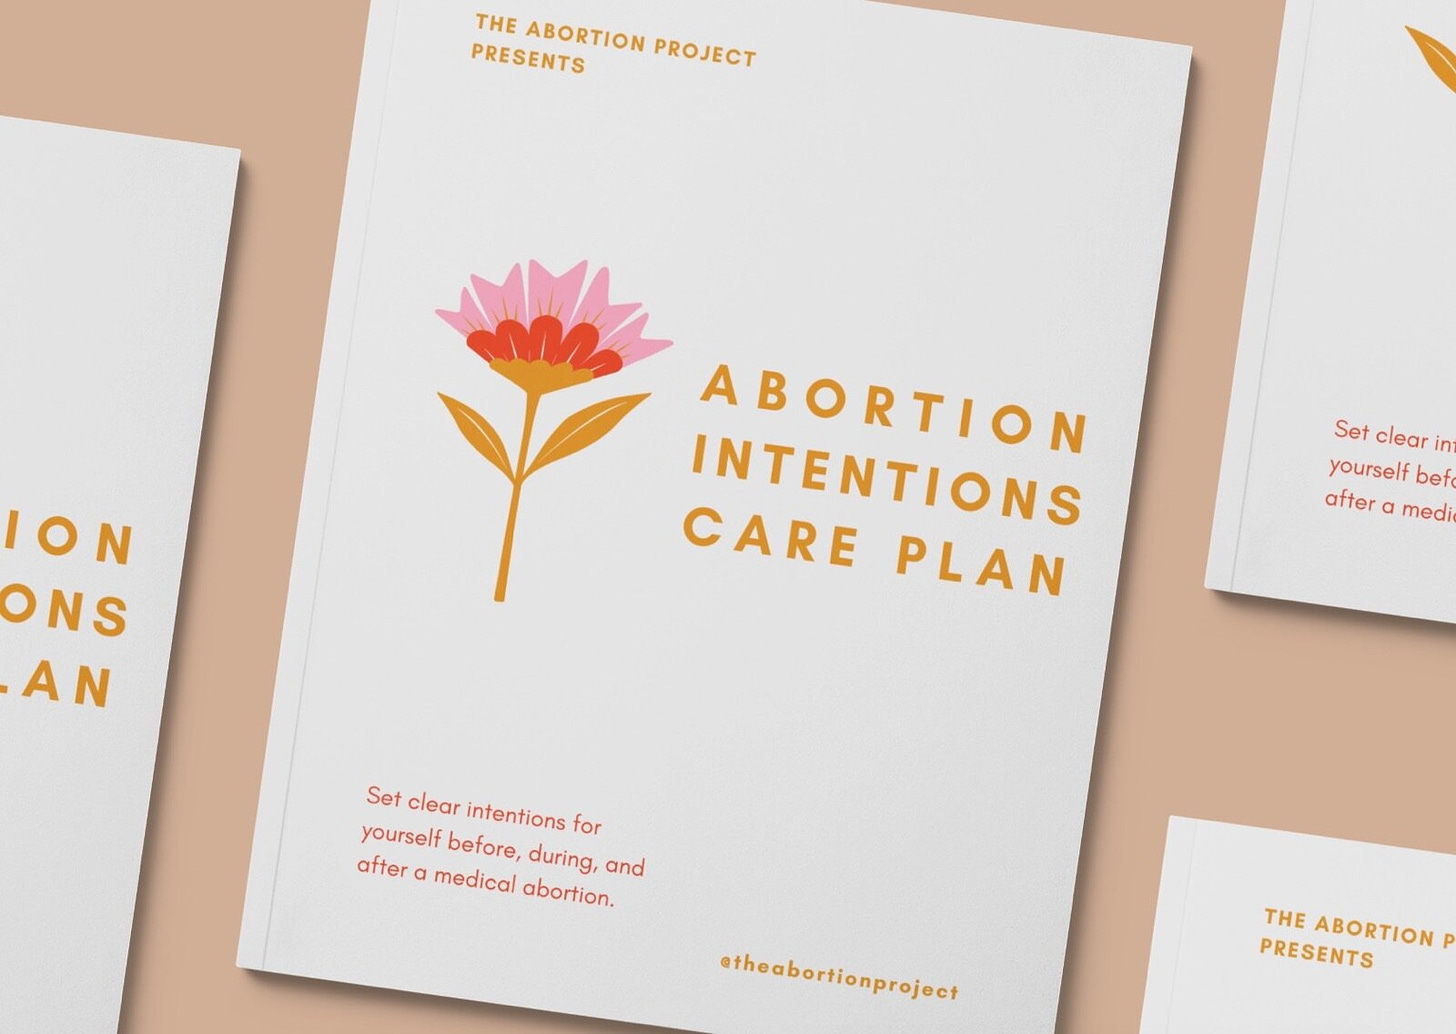 Abortion Intention Care Plan